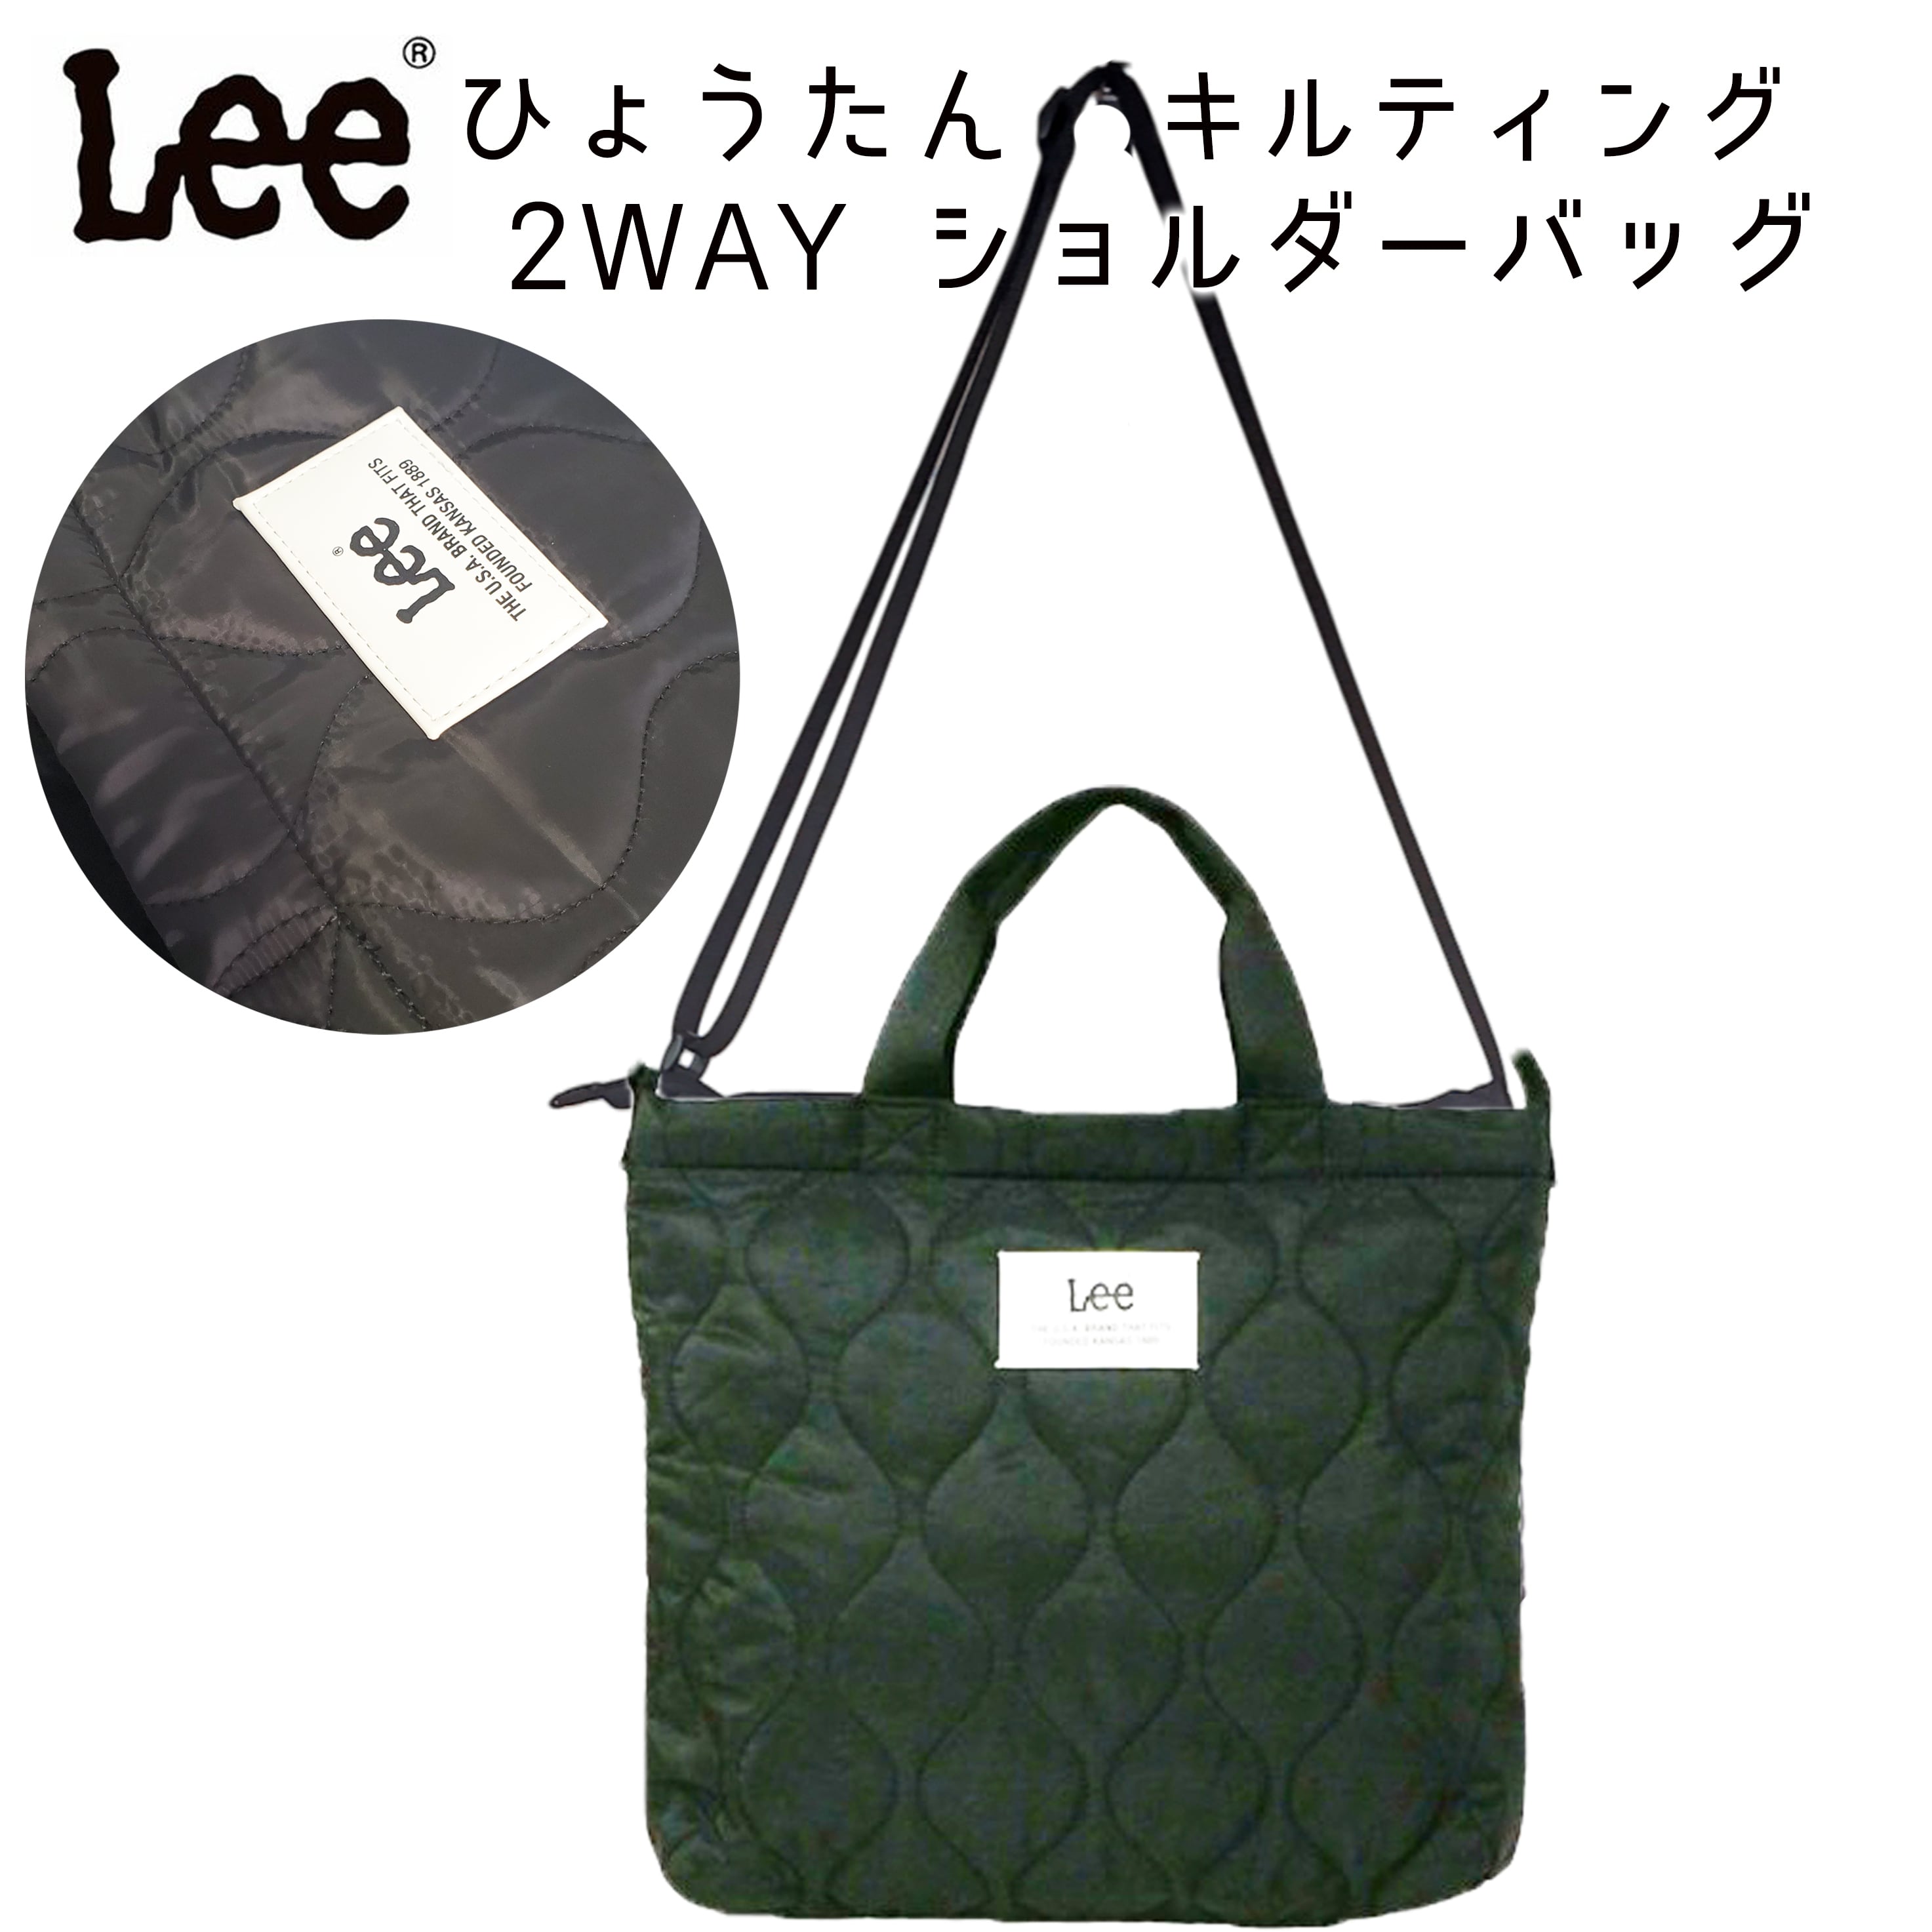 SALE！Lee クラッチバッグ 手さげバッグ 新品